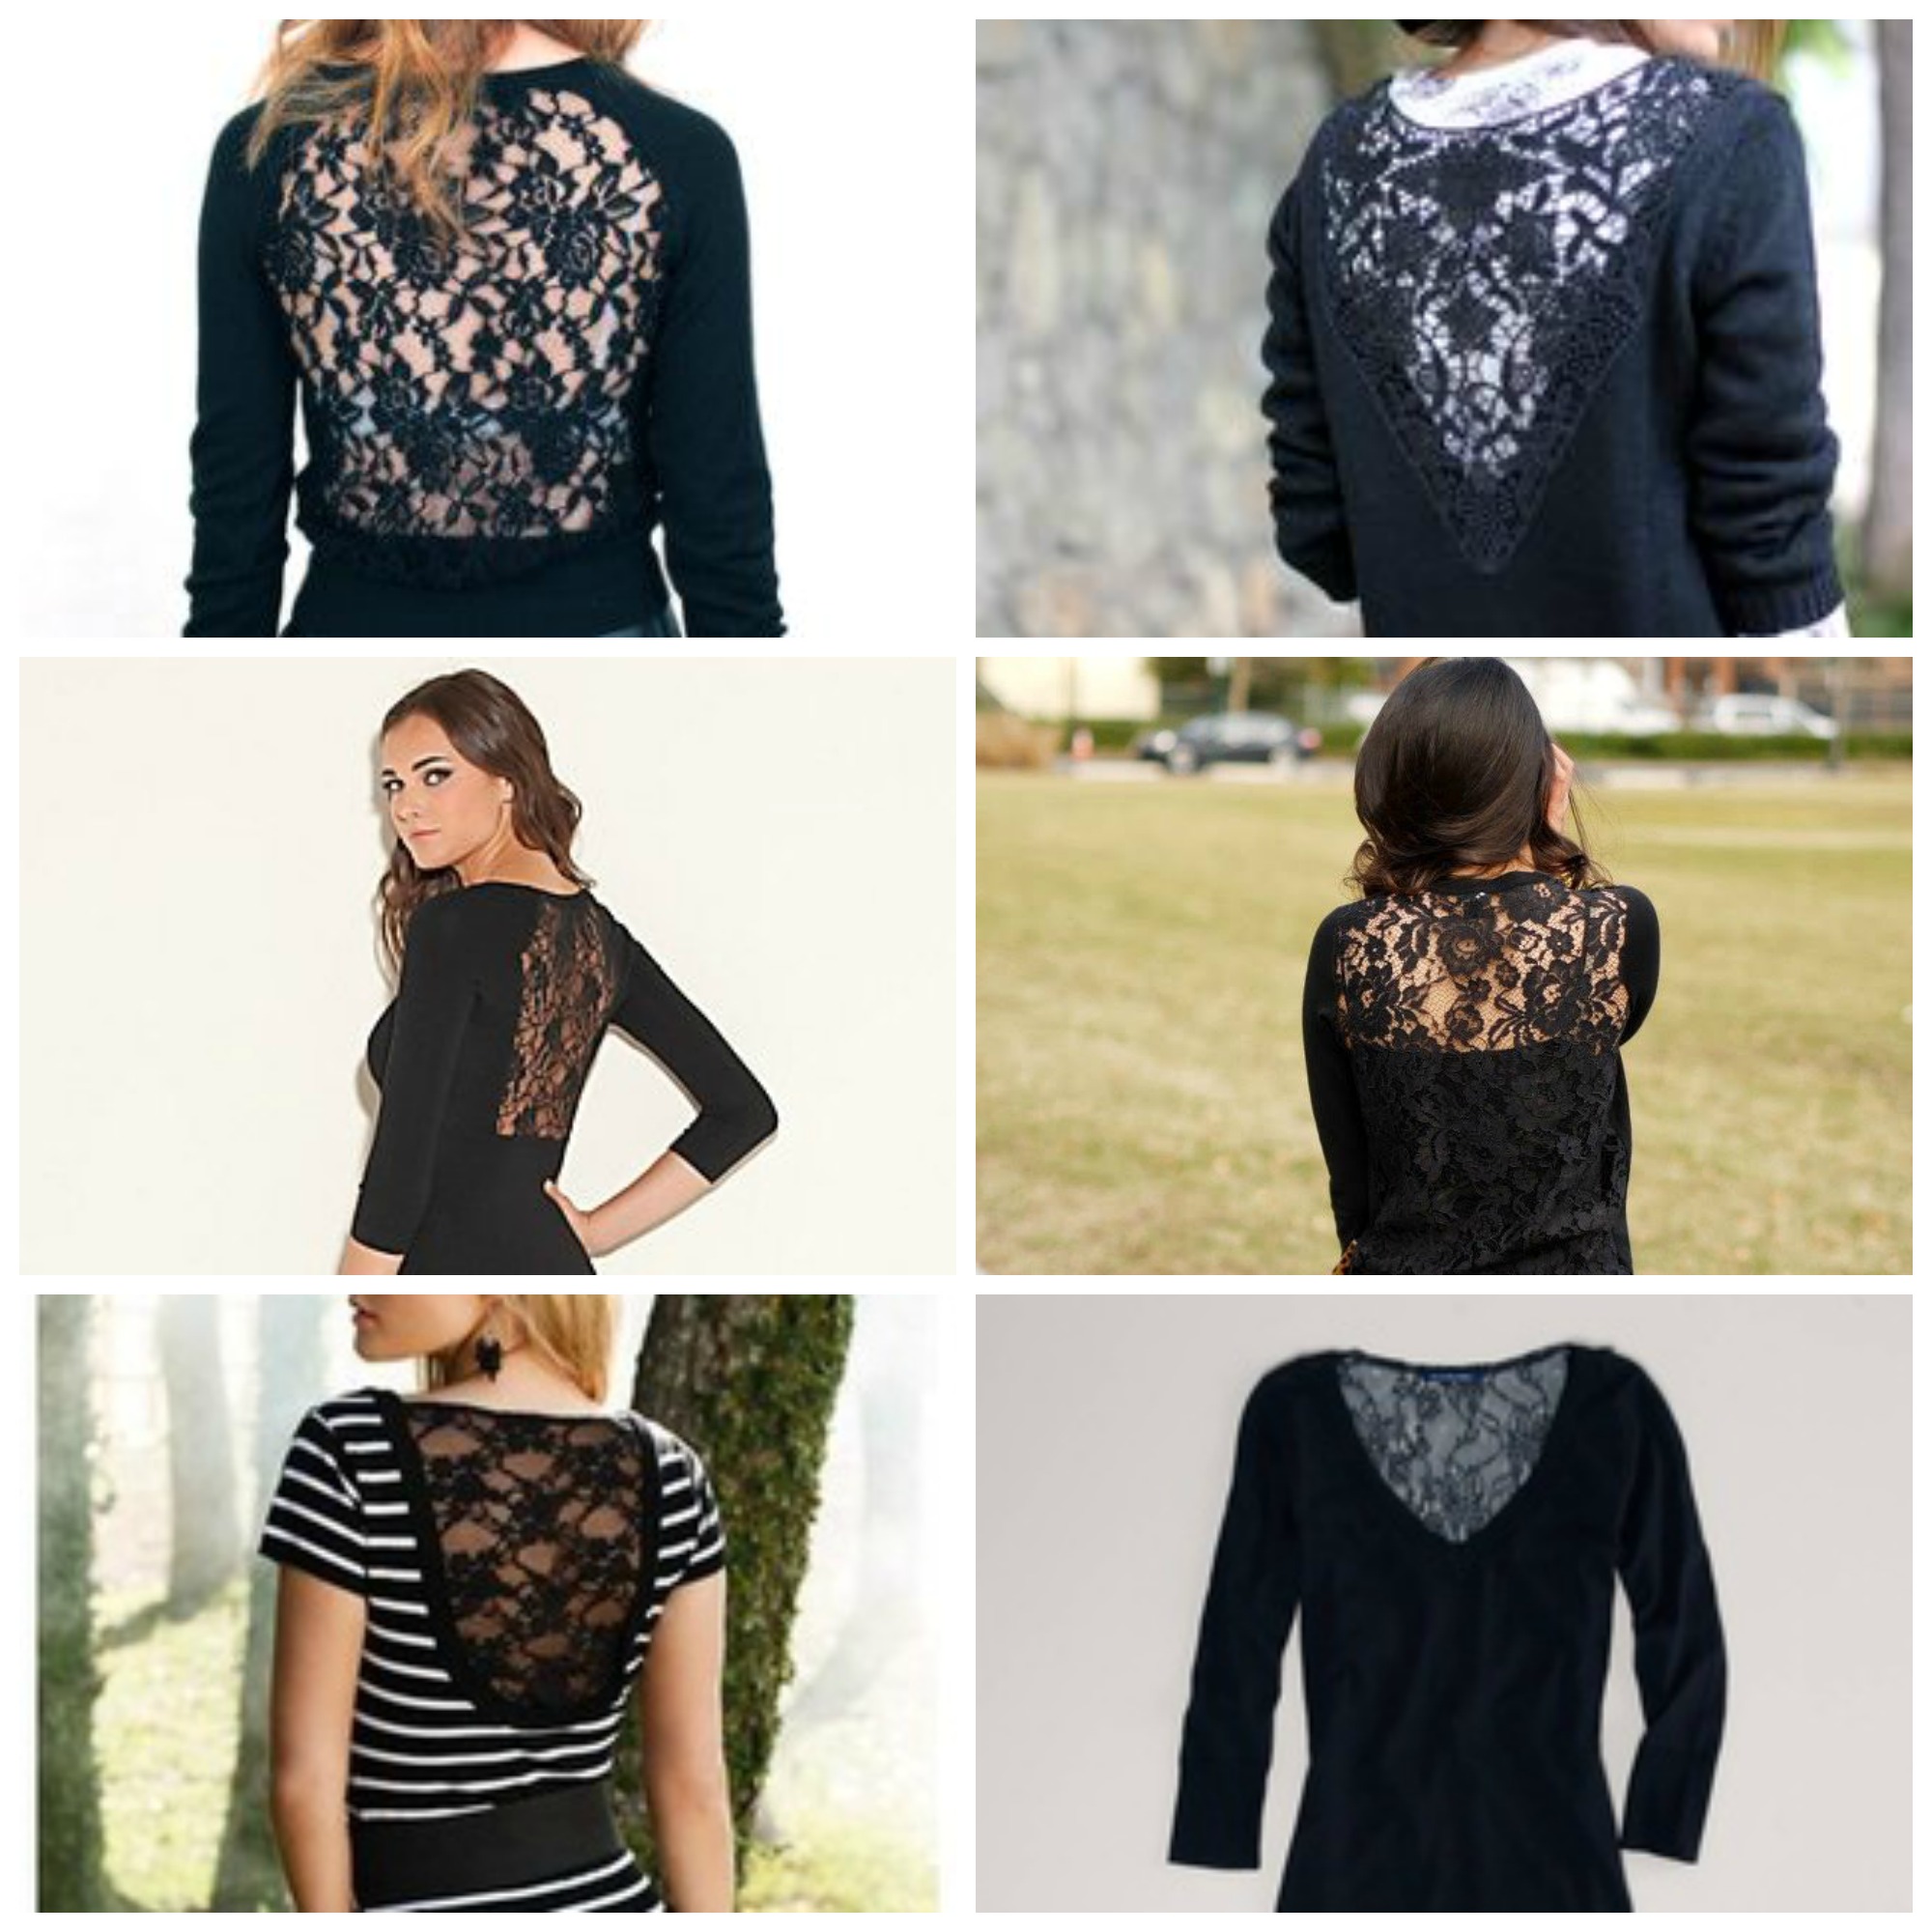 Sew: Lace Back Sweater Refashion {Inserting Lace into a Sweater DIY Tutorial}